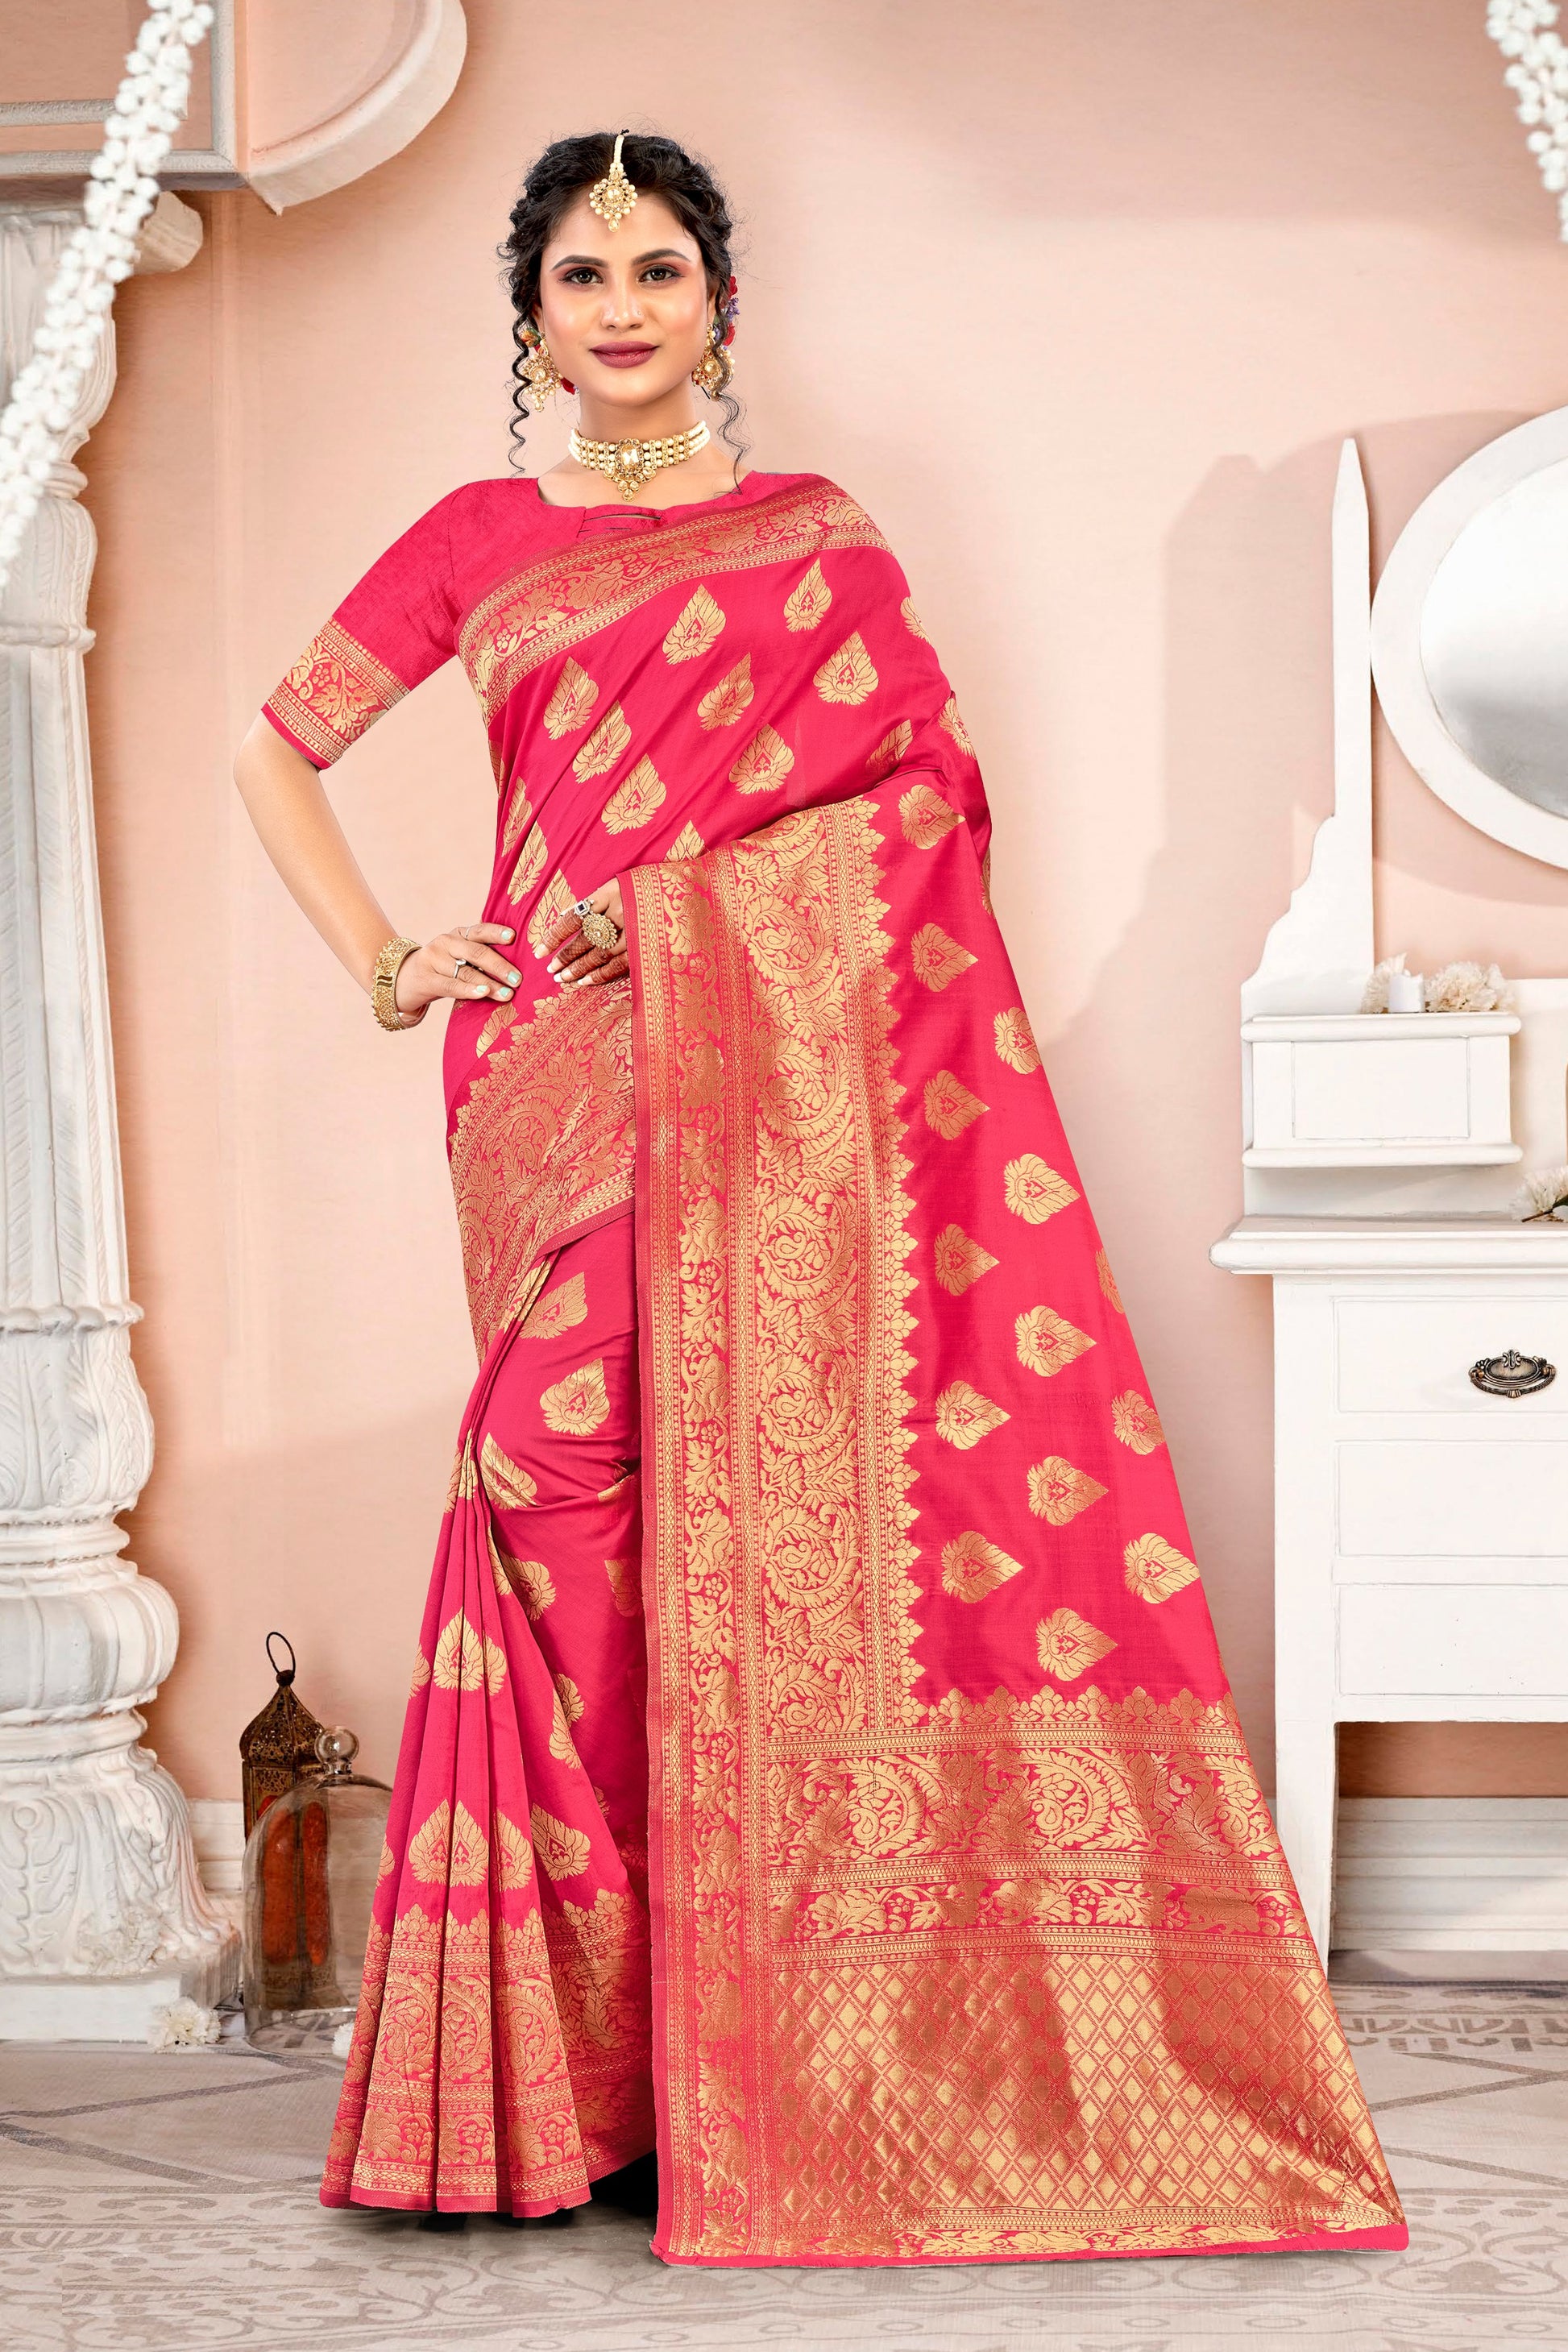 GORGEOUS PURE WEAVING BANARSI SILK SAREE IN PINK FOR ALL FESTIVALS